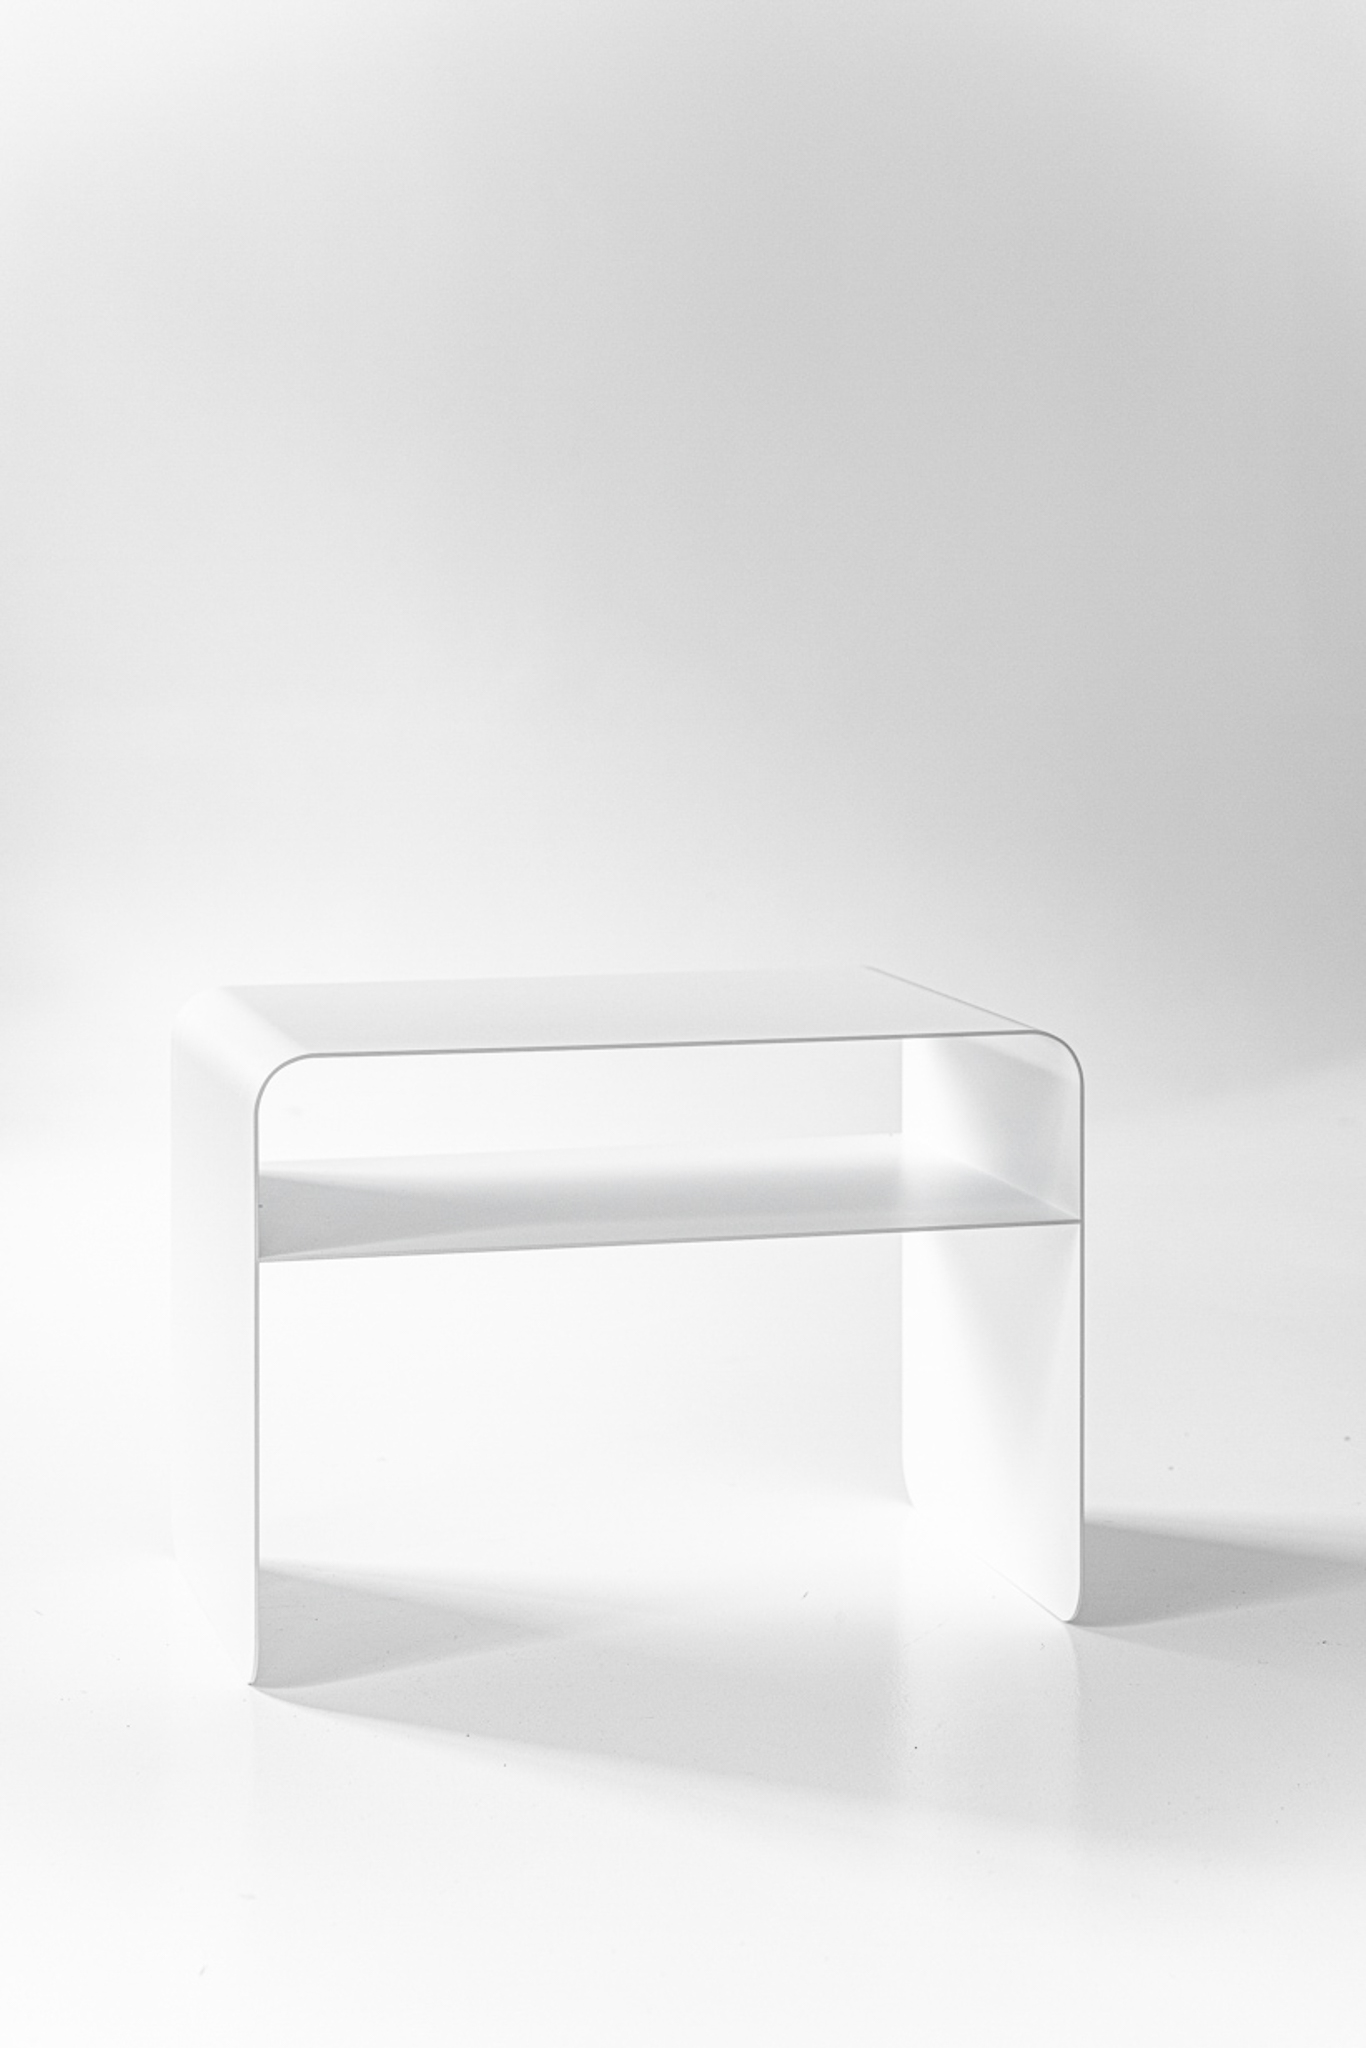 METALLBUDE // COSMO - SIDE TABLE - WHITE